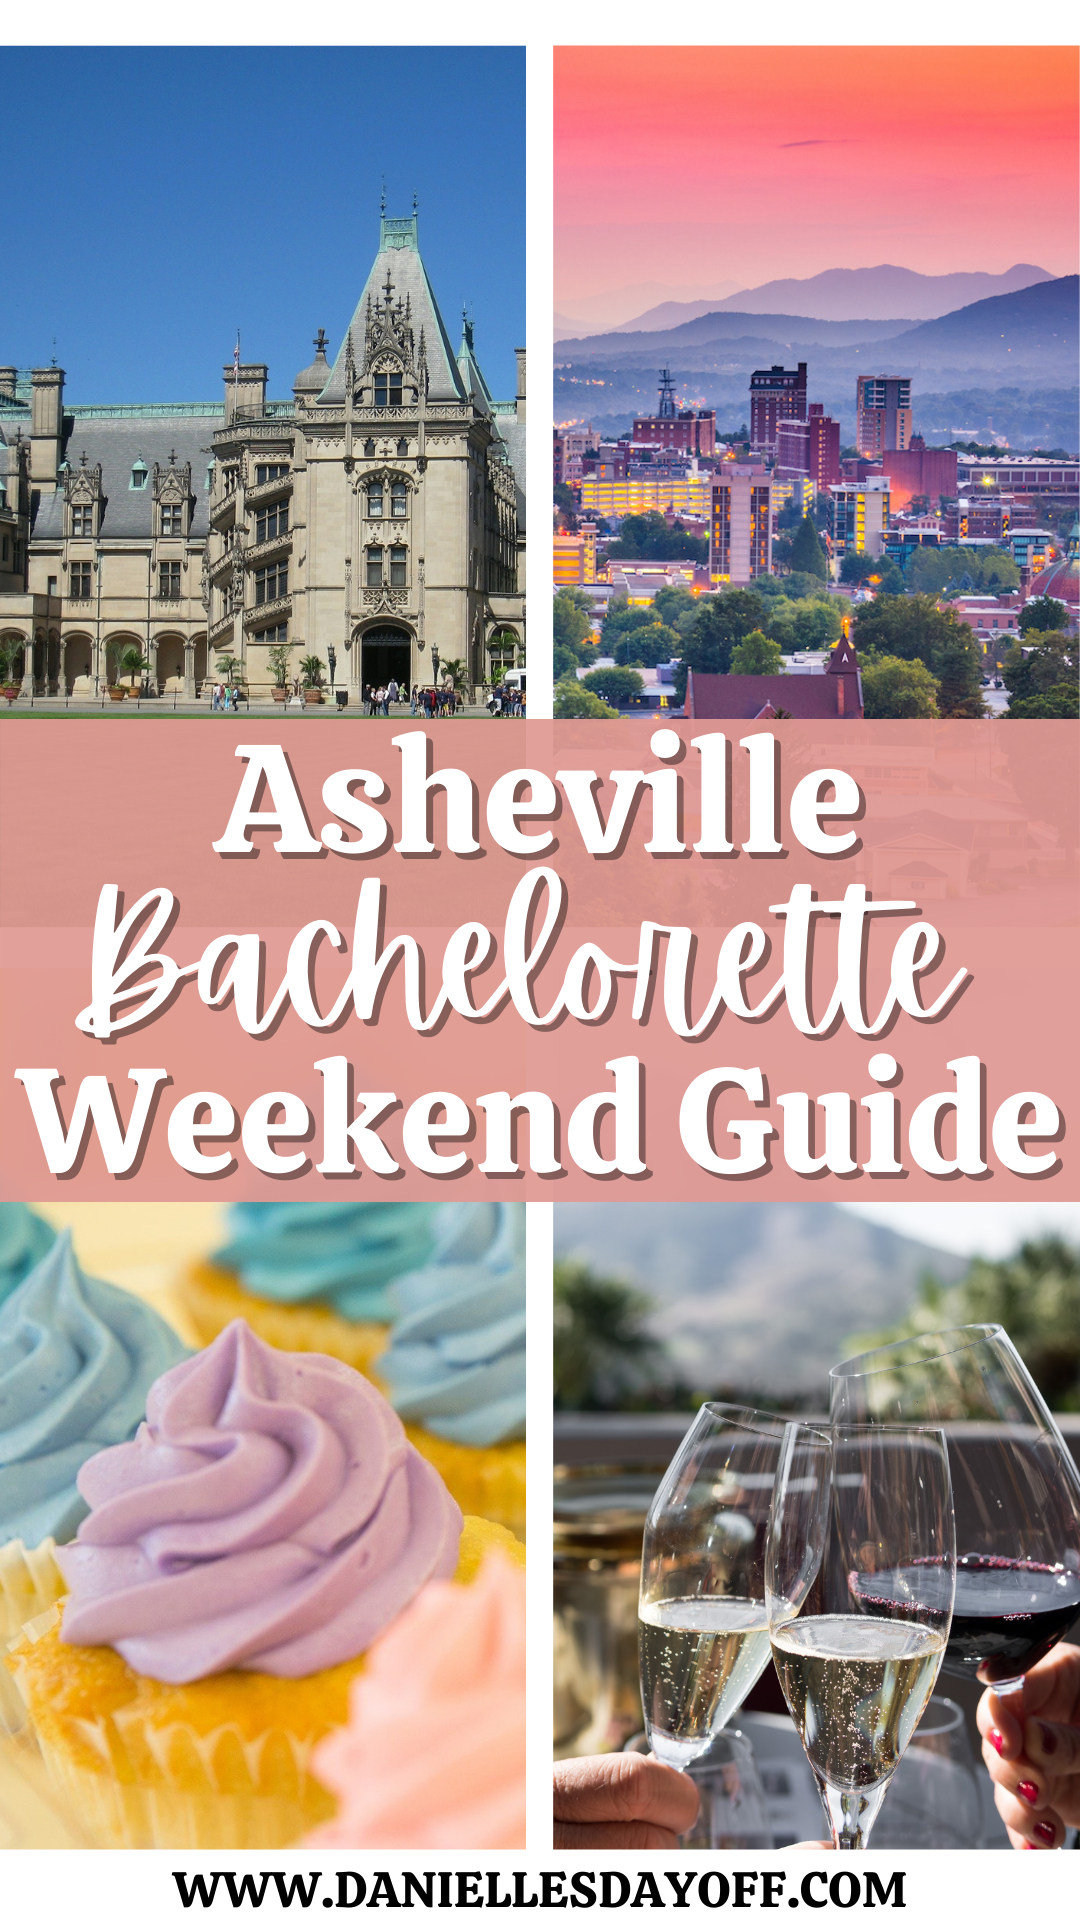 The Ultimate Asheville Bachelorette Weekend Guide!